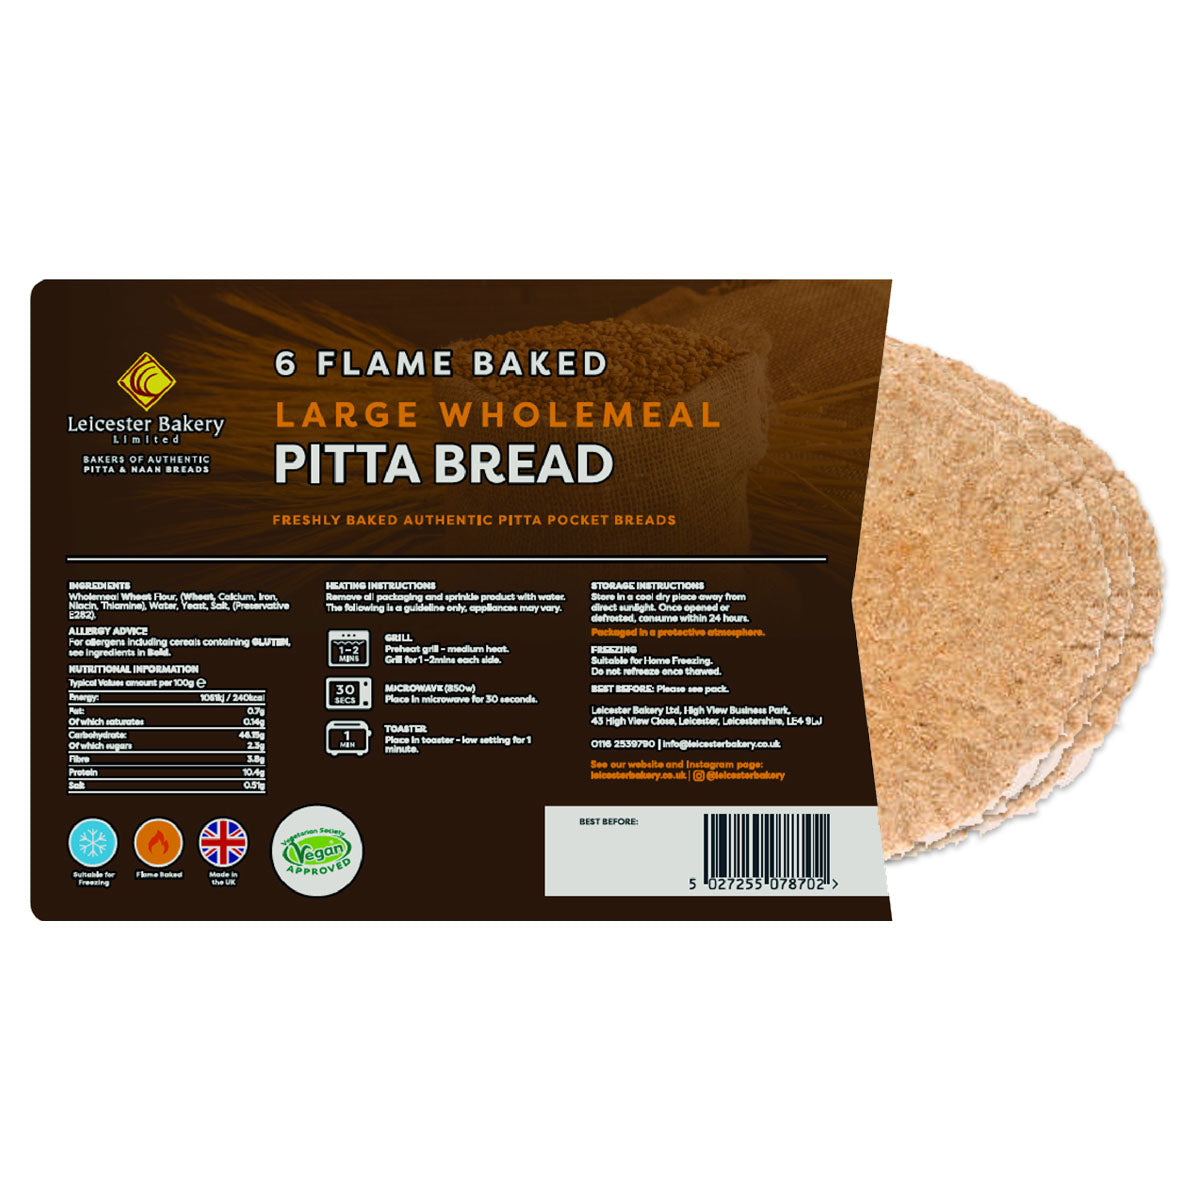 A package of Leicester Bakery - Large Wholemeal Pitta Bread - 6 Pack on a white background.